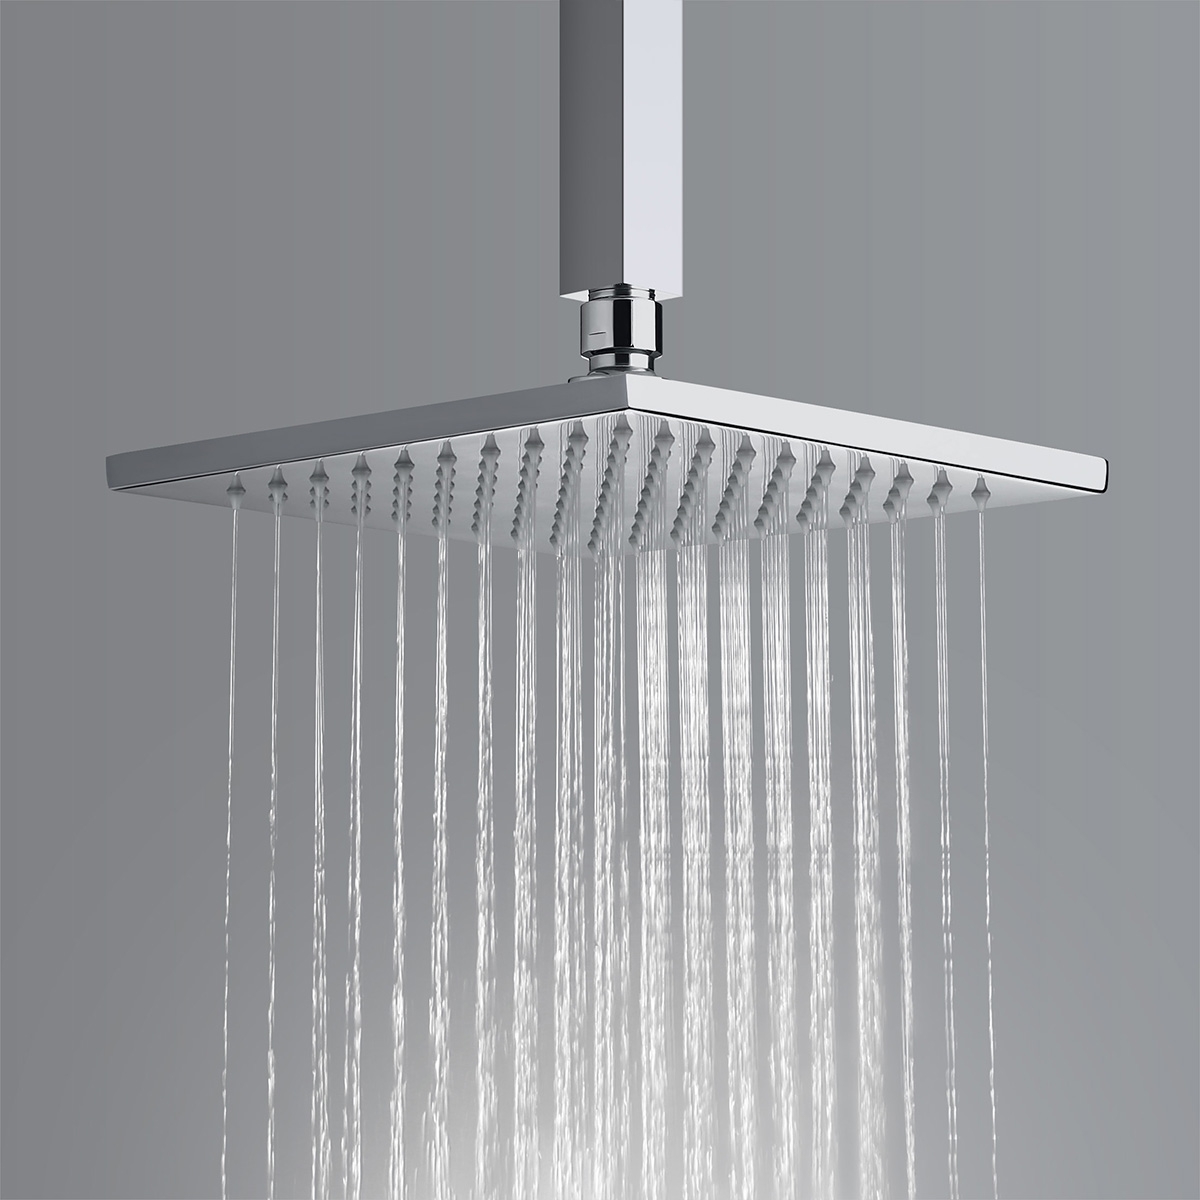 8 Inch Square Solid Brass Bathroom Rain Shower Head In Polished Chrome Finish